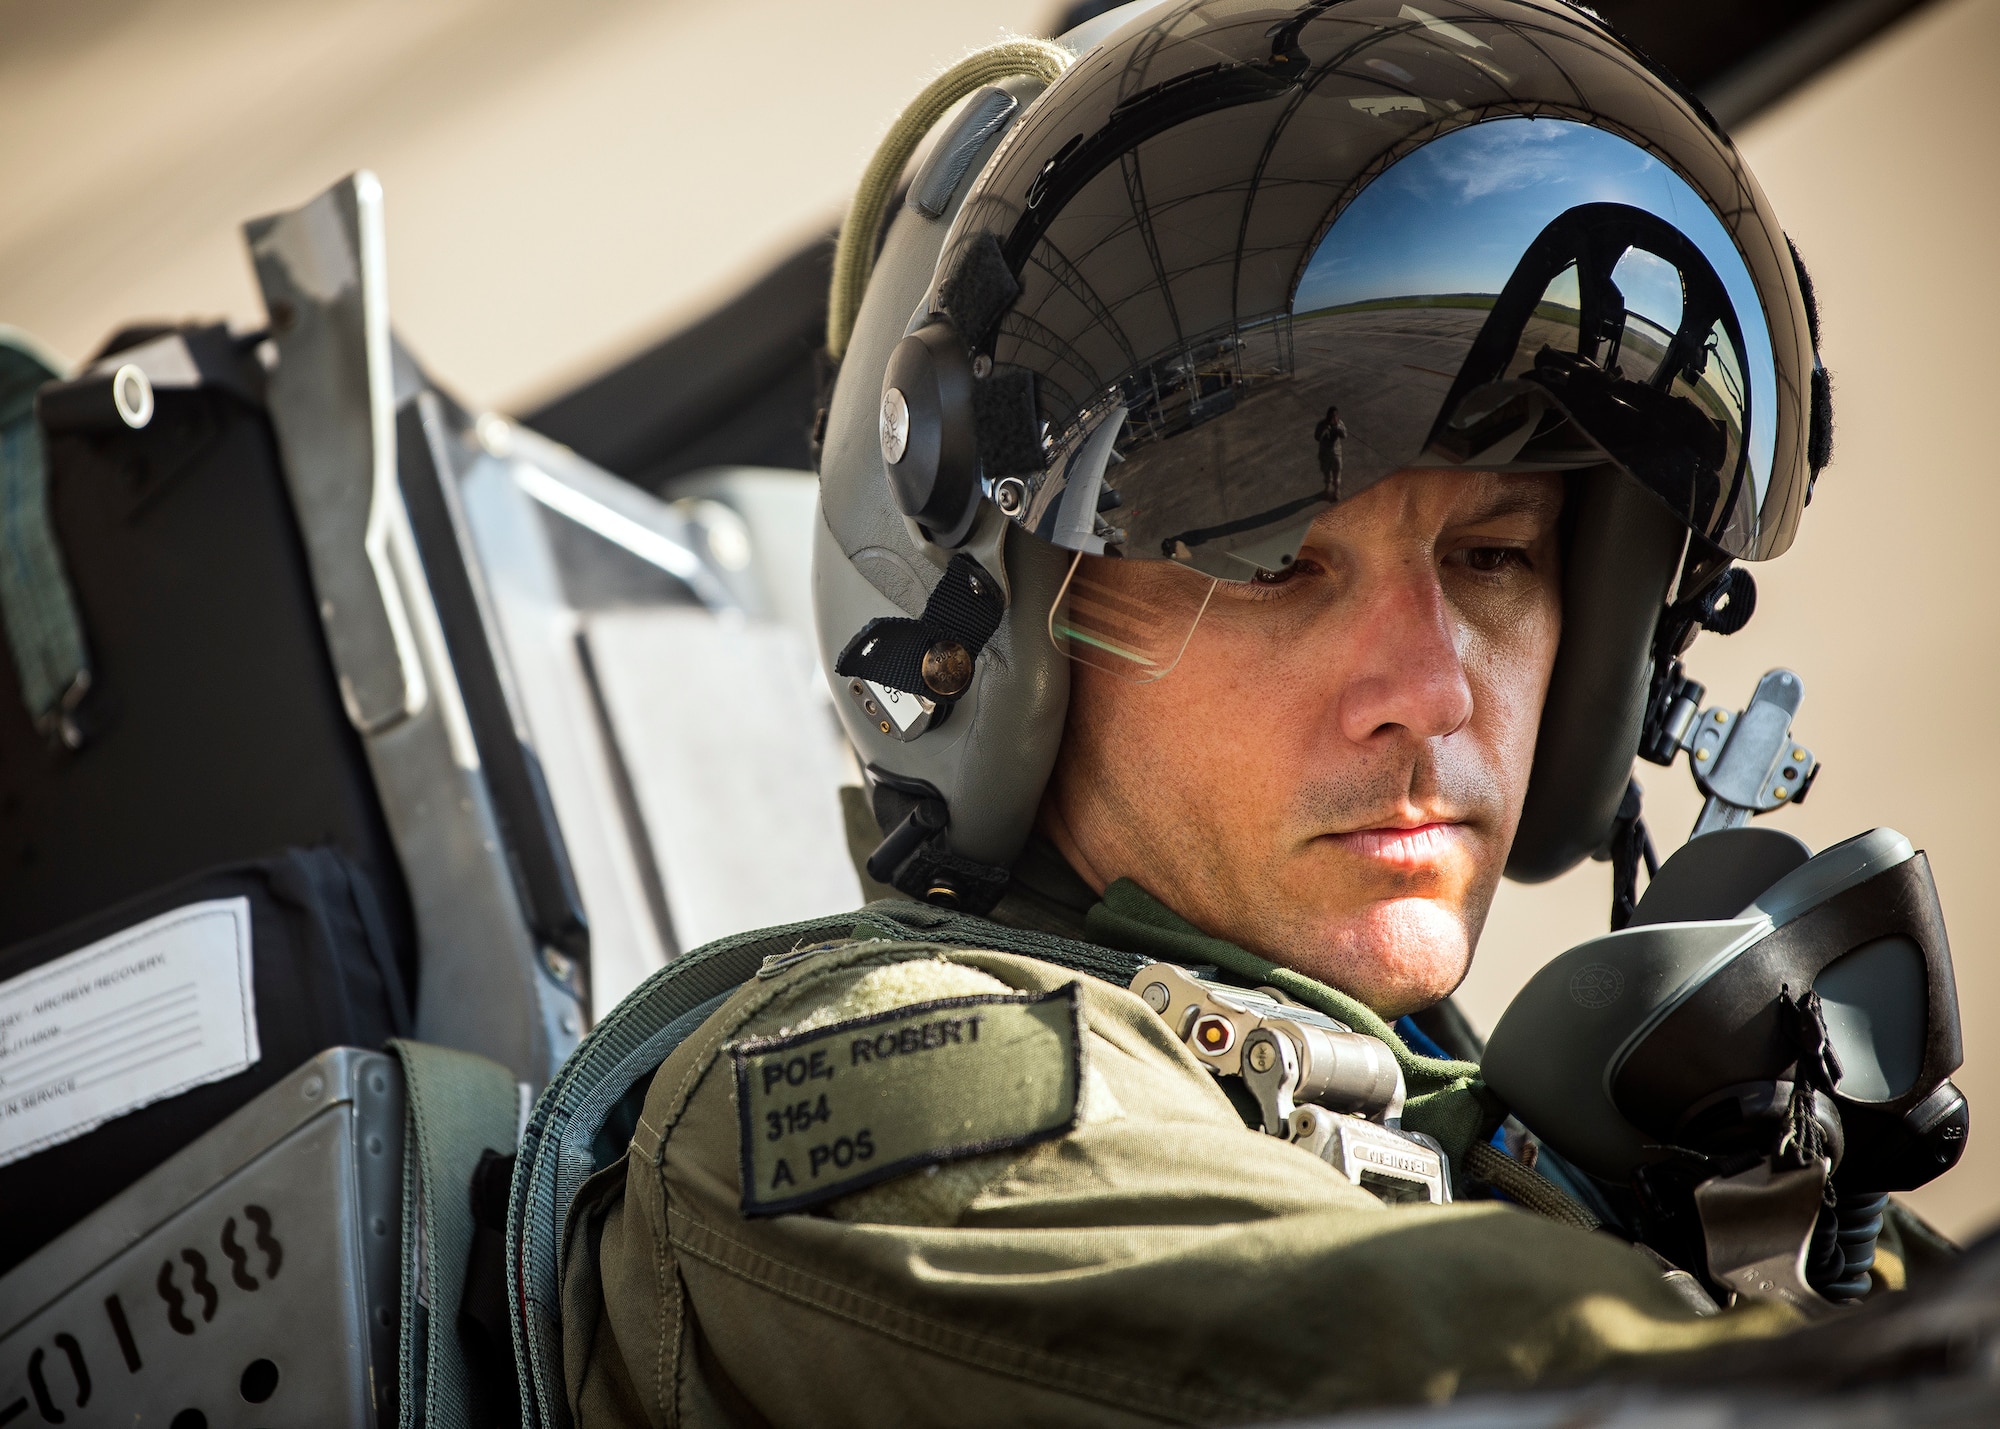 Capt. Robert Poe, 74th Fighter Squadron chief of safety and A-10C Thunderbolt II pilot, sits in the cockpit of an A-10, June 28, 2019, at Moody Air Force Base, Ga. Poe is one of the few Airmen who have earned three different aviation badges. During his 15-year career, Poe earned his enlisted aircrew wings as a boom operator for KC-135 Stratotankers, then commissioned as a navigator for the U-28A aircraft and earned his combat systems officer badge. In 2013 he cross-trained to earn his pilot wings and become an A-10 pilot. (U.S. Air Force photo by Airman 1st Class Eugene Oliver)